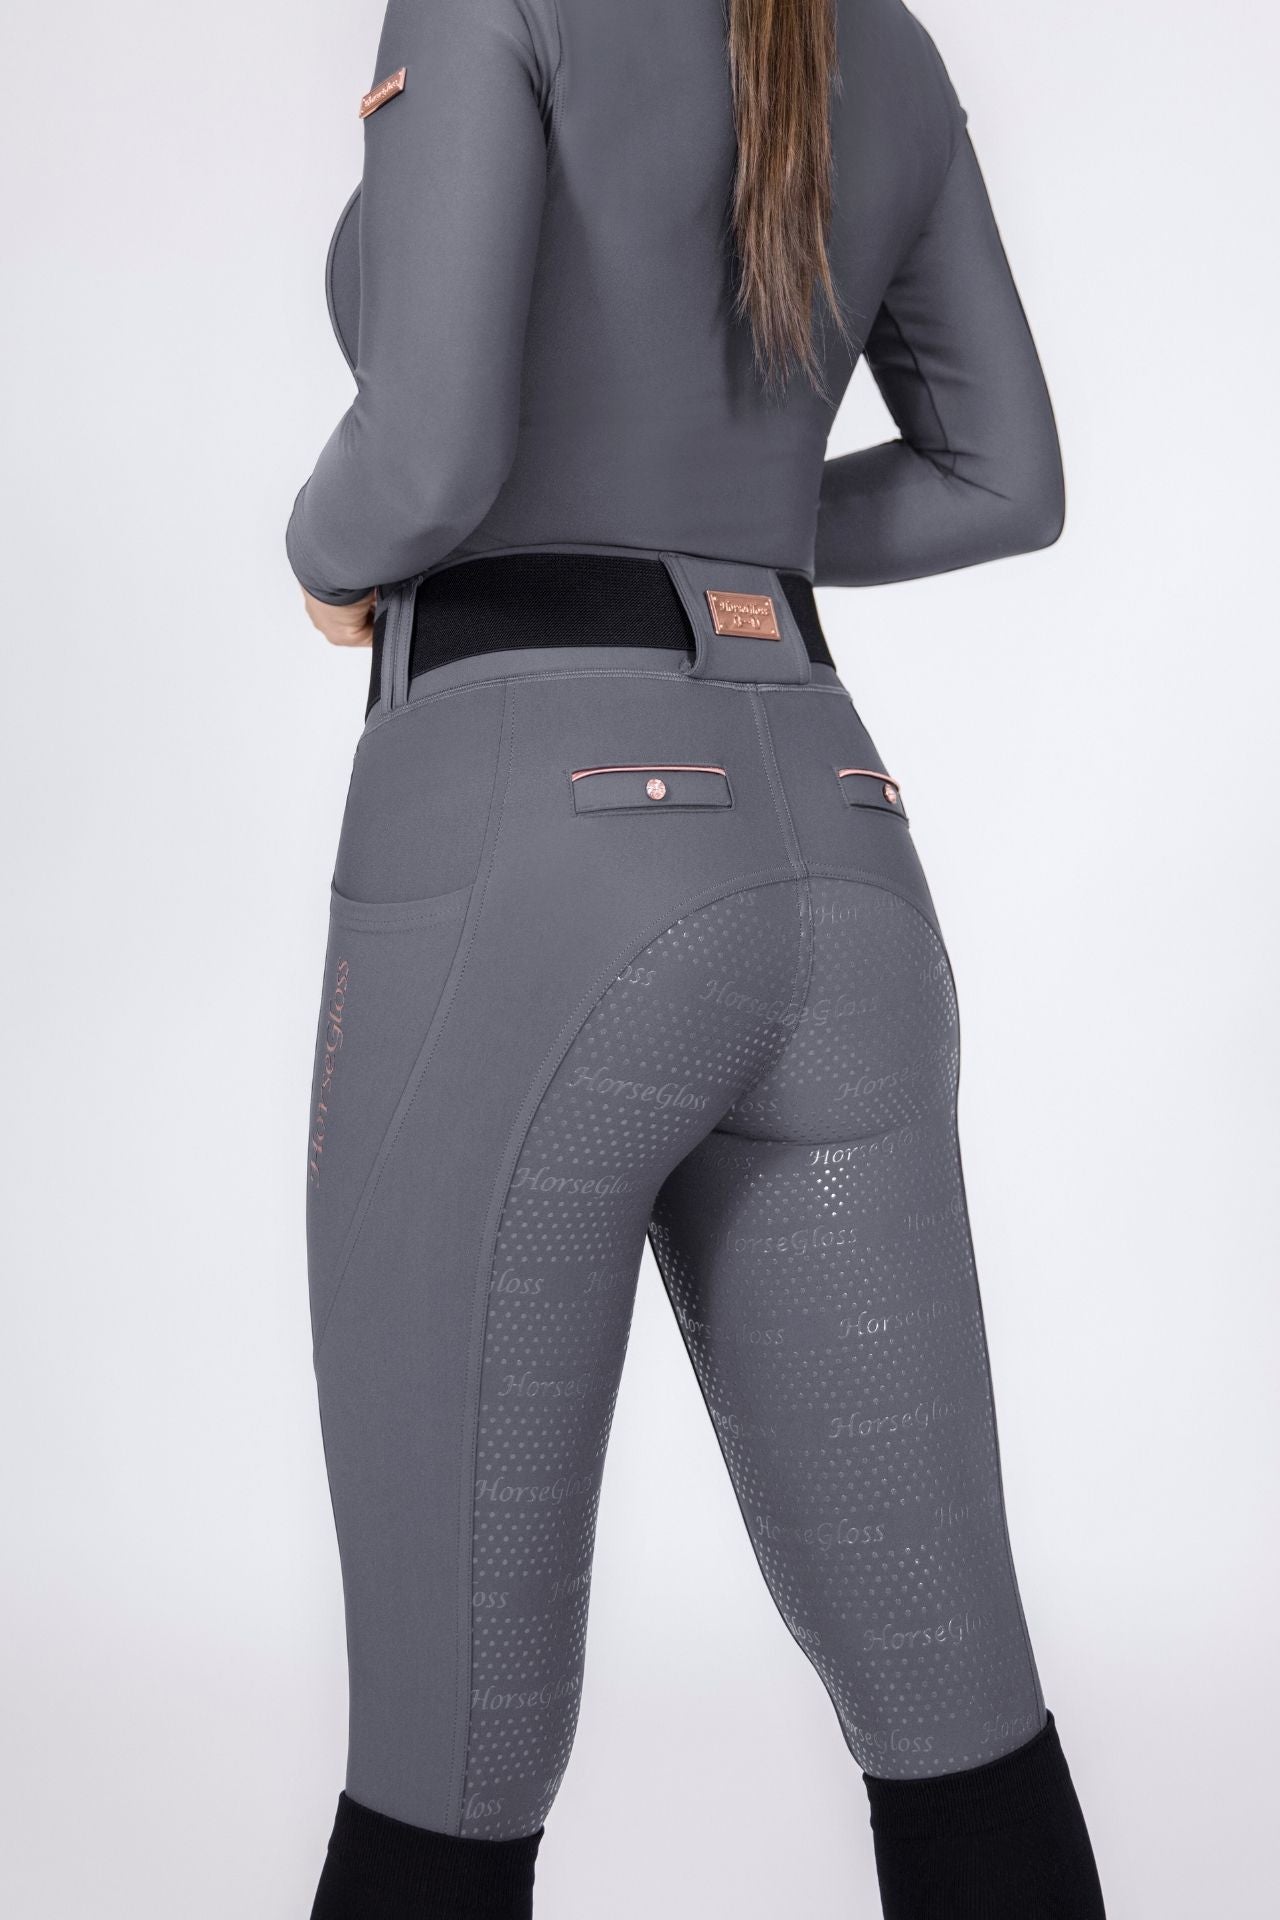 KYLIE - RIDING LEGGINGS  BLACK ''SILVER'' FULL SEAT SILICONE – HorseGloss